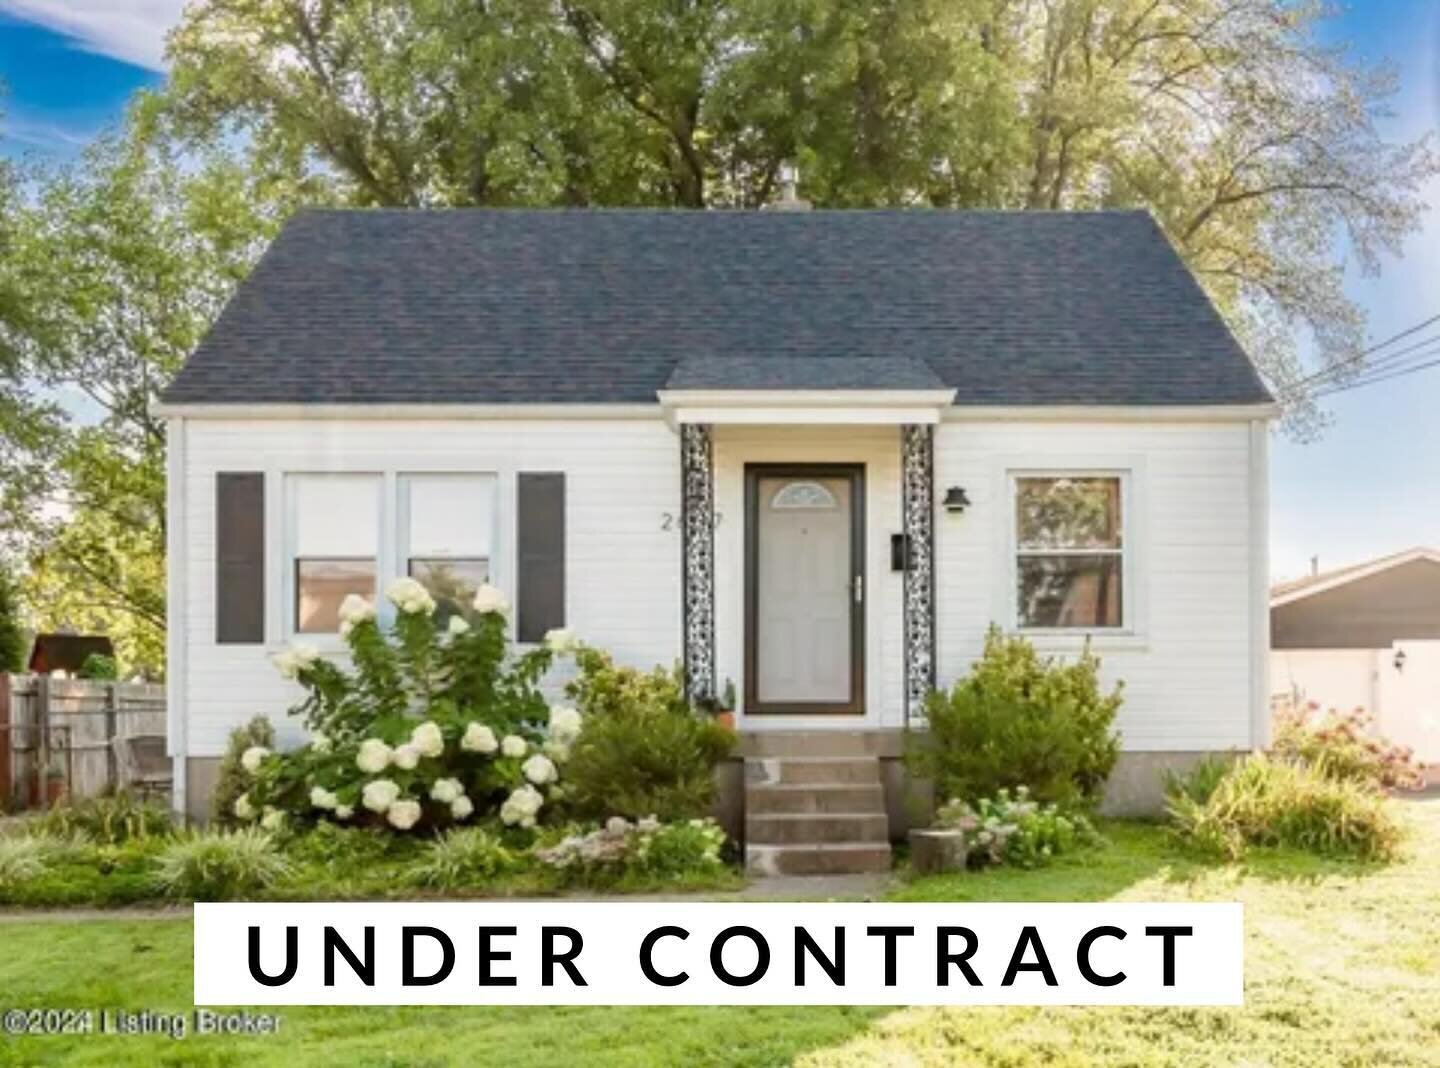 So excited for my buyer who got this absolute cutie under contract on Friday night! Inspection coming up on Wednesday 💪
.
Property listed by Corey Ritter, Mammoth Solutions
Buyer represented by @brennabrooksrealtor
@homes502
@jaypittsrealtor, Princi